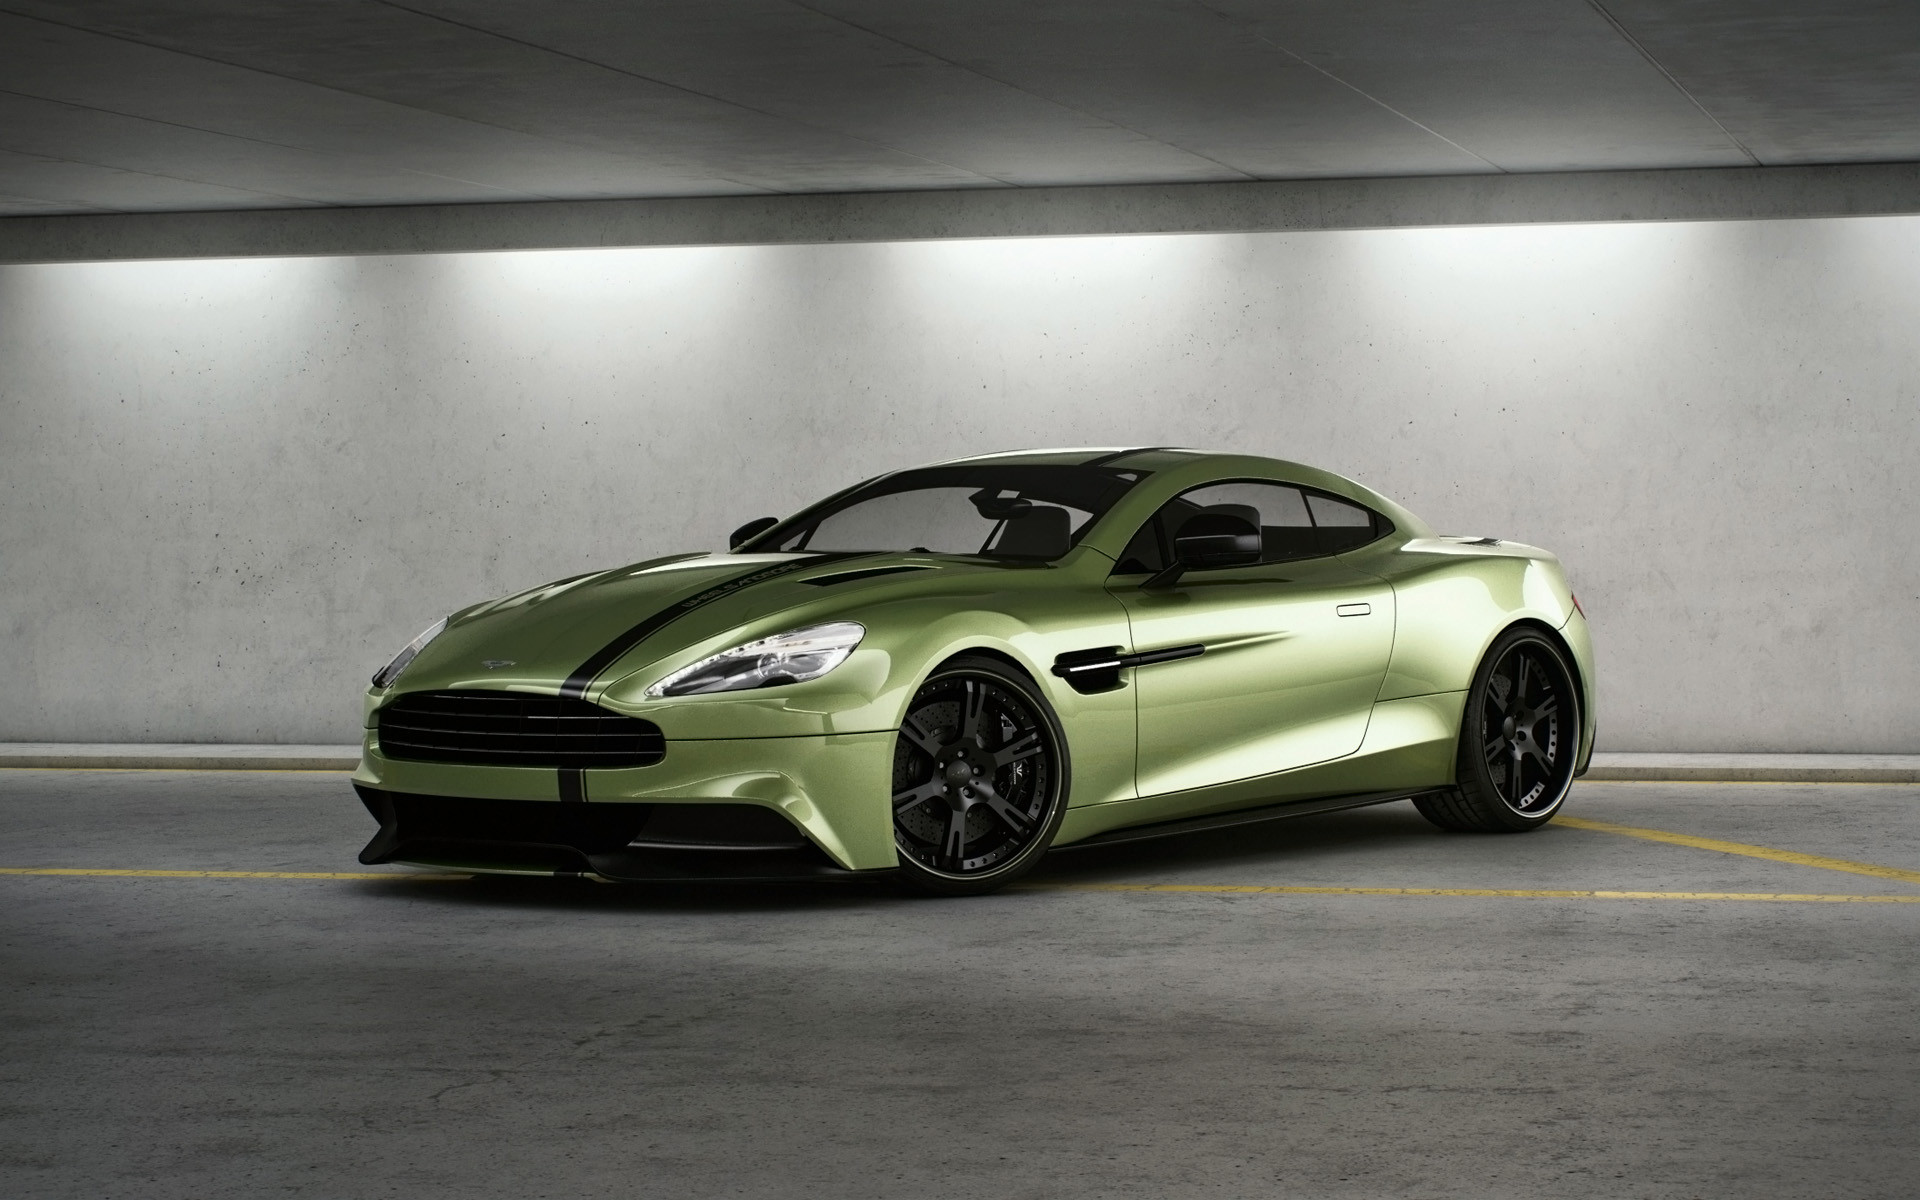 1920x1200  px Aston Martin Db9 Wallpapers | Aston Martin Db9 Widescreen  Image | Stunning Pictures,